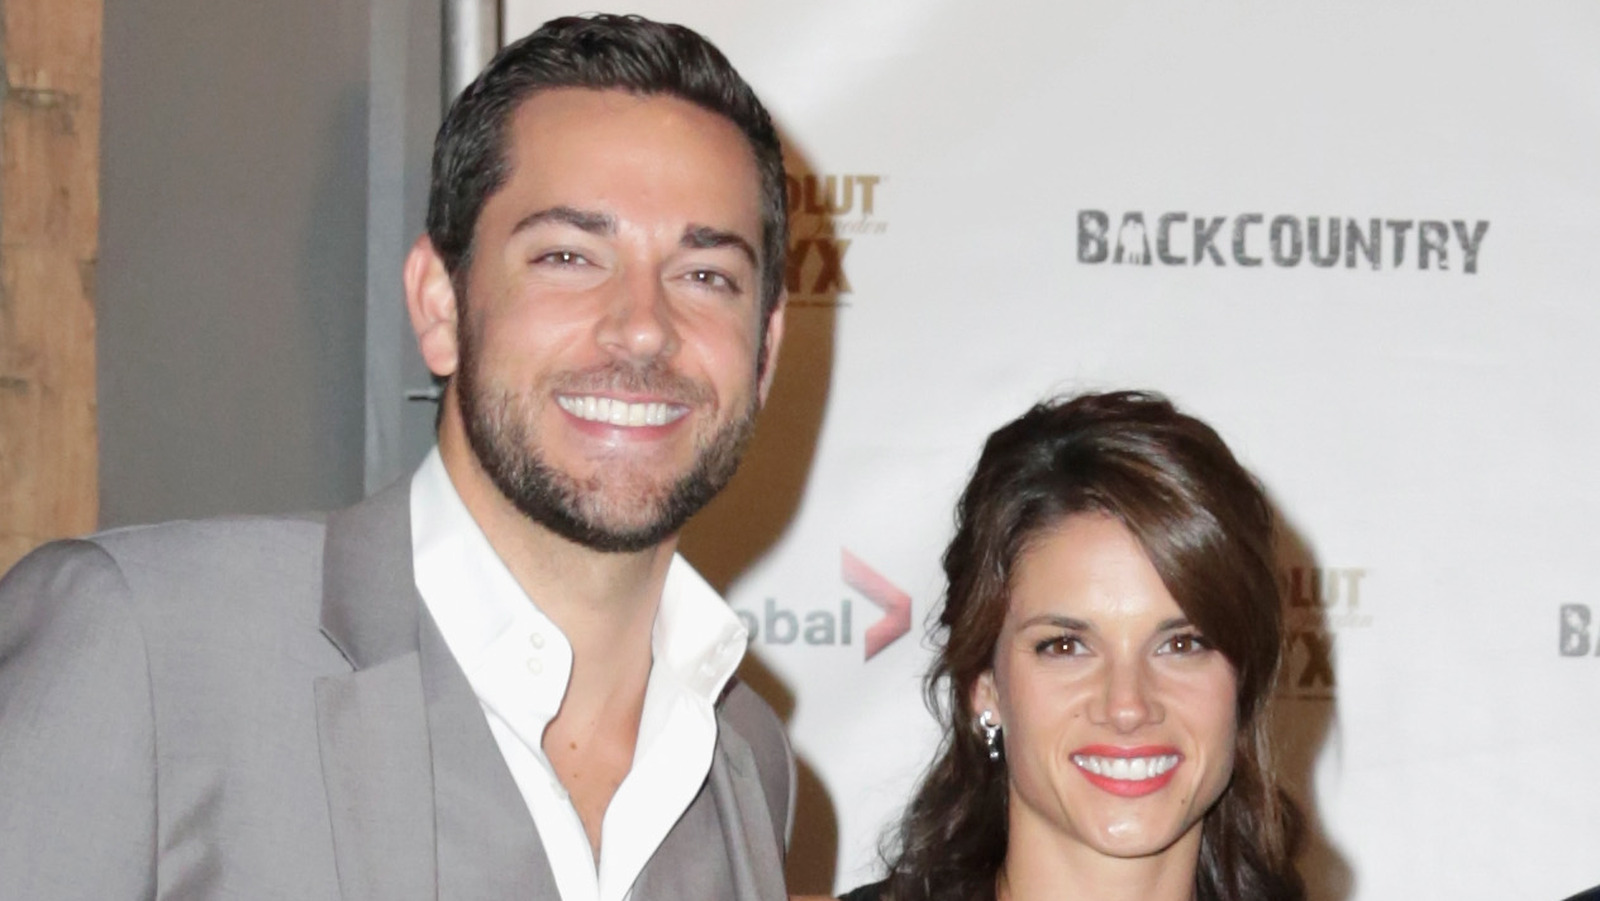 Zachary Levi's Marriage To Missy Peregrym Didn't Even Last A Year